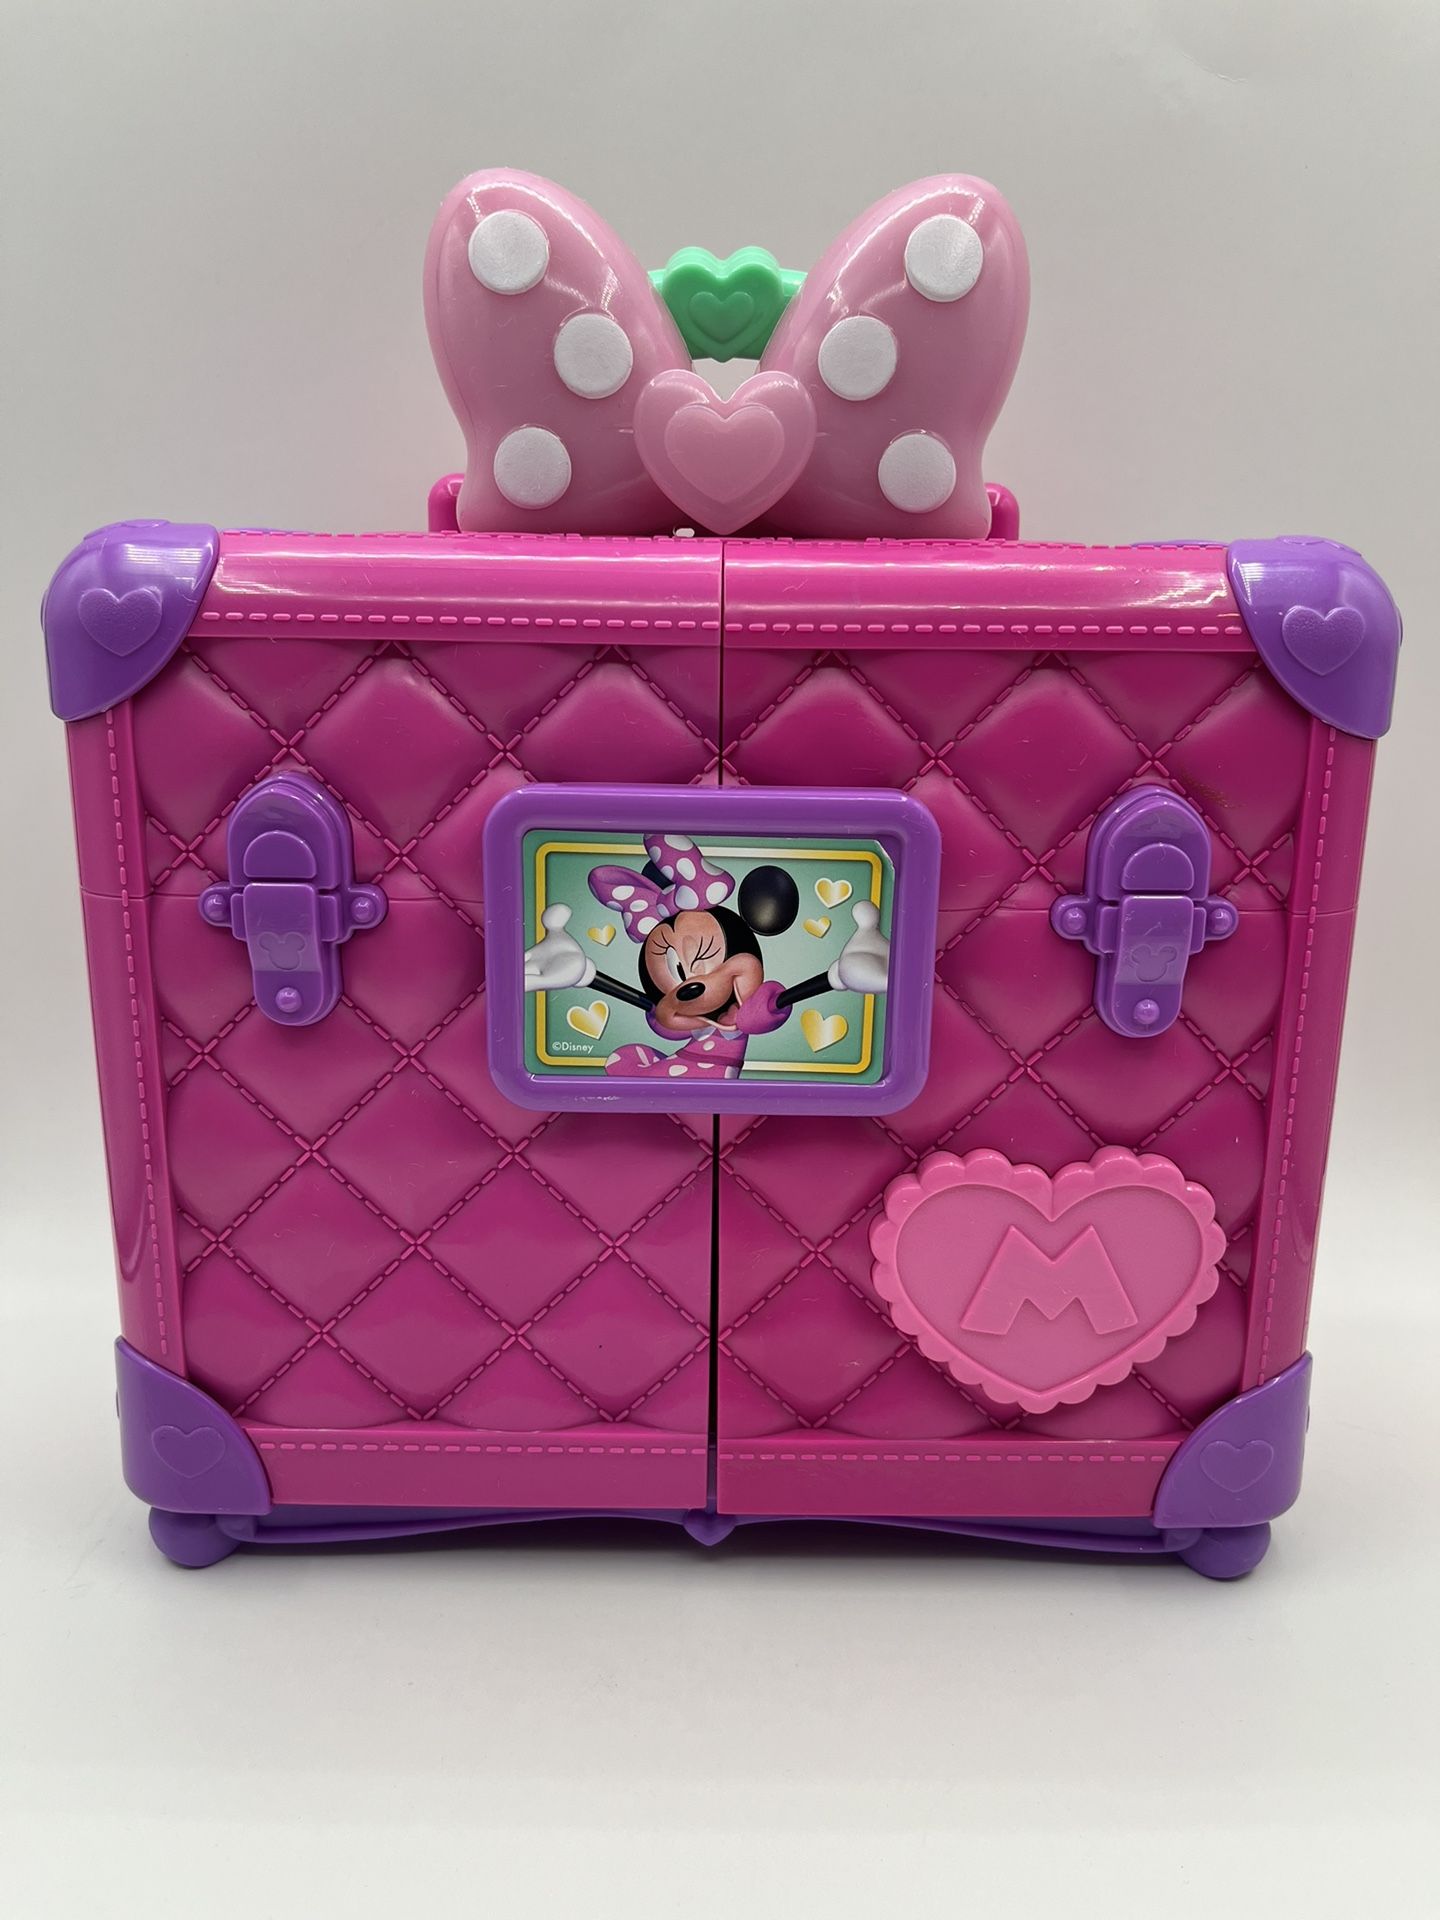 Disney Minnie Mouse Sweet Reveals Glam & Glow  Playset . Just The Case. No Accessories.